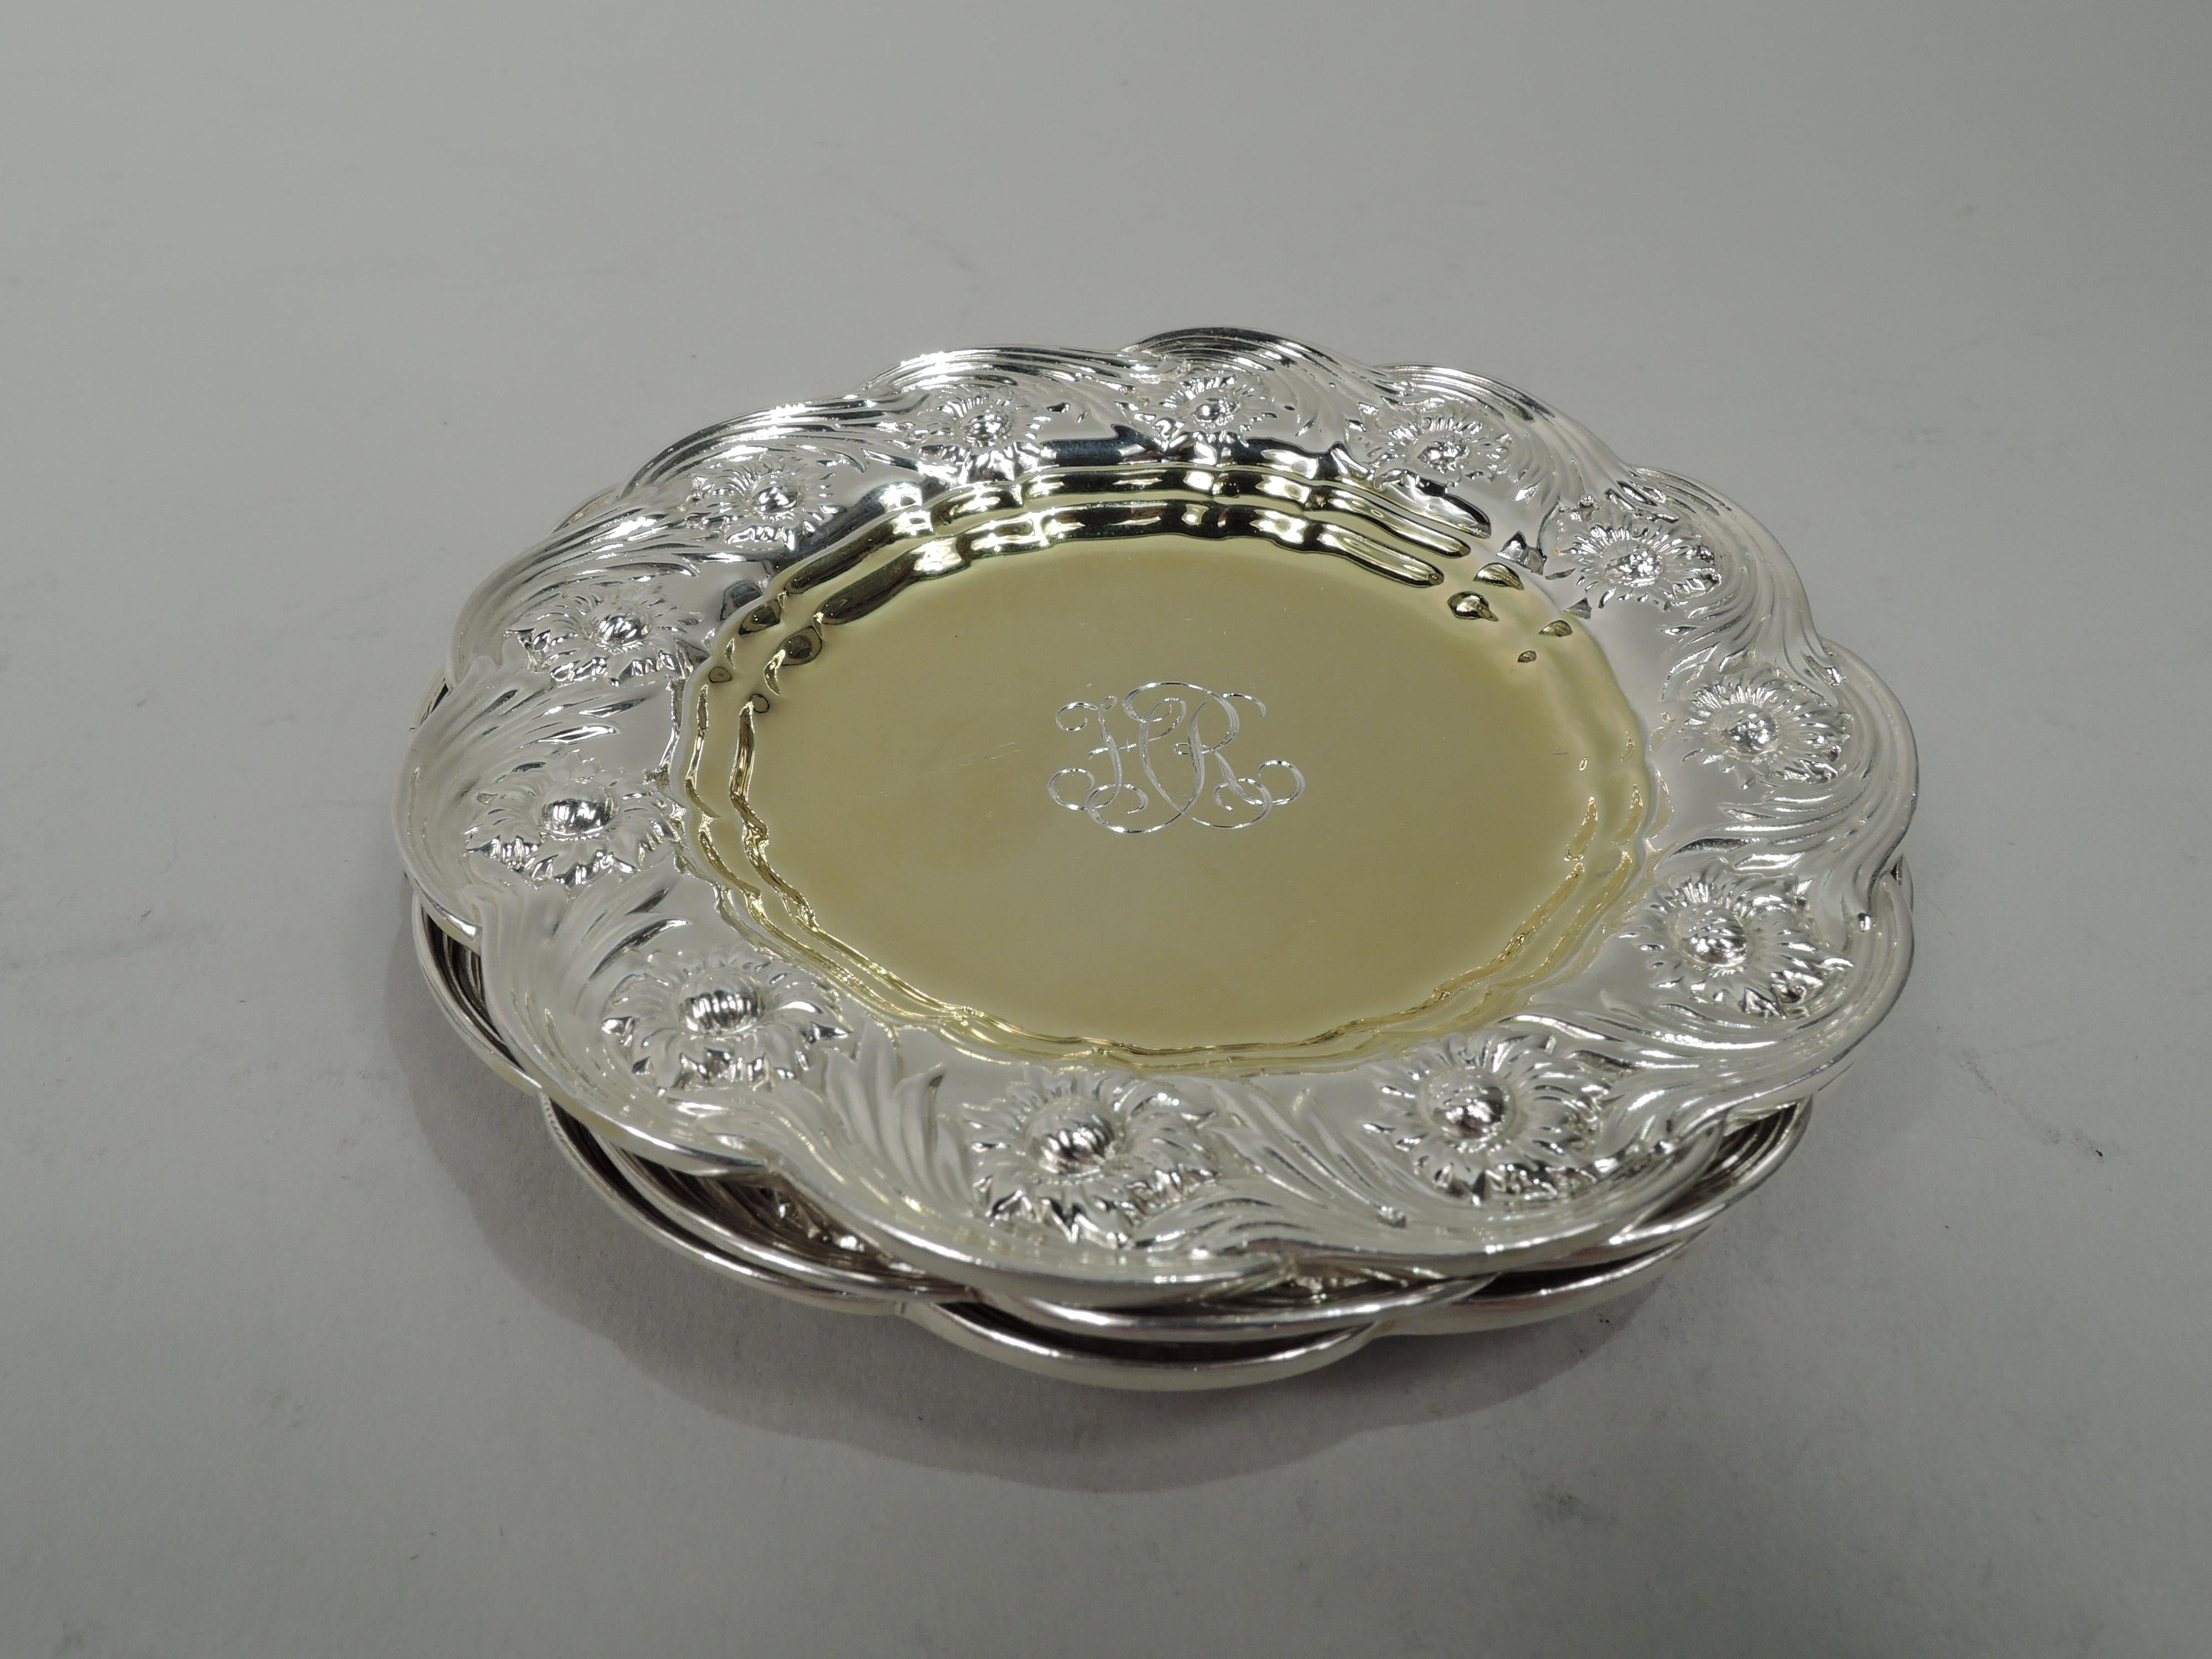 Set of 3 Chrysanthemum sterling silver butter pats. Made by Tiffany & Co. in New York. Plain and round gilt well. Shoulder has rinceaux-style flower heads and tendrils. Rim scalloped. Engraved interlaced script monogram. Marked “Tiffany & Co. /